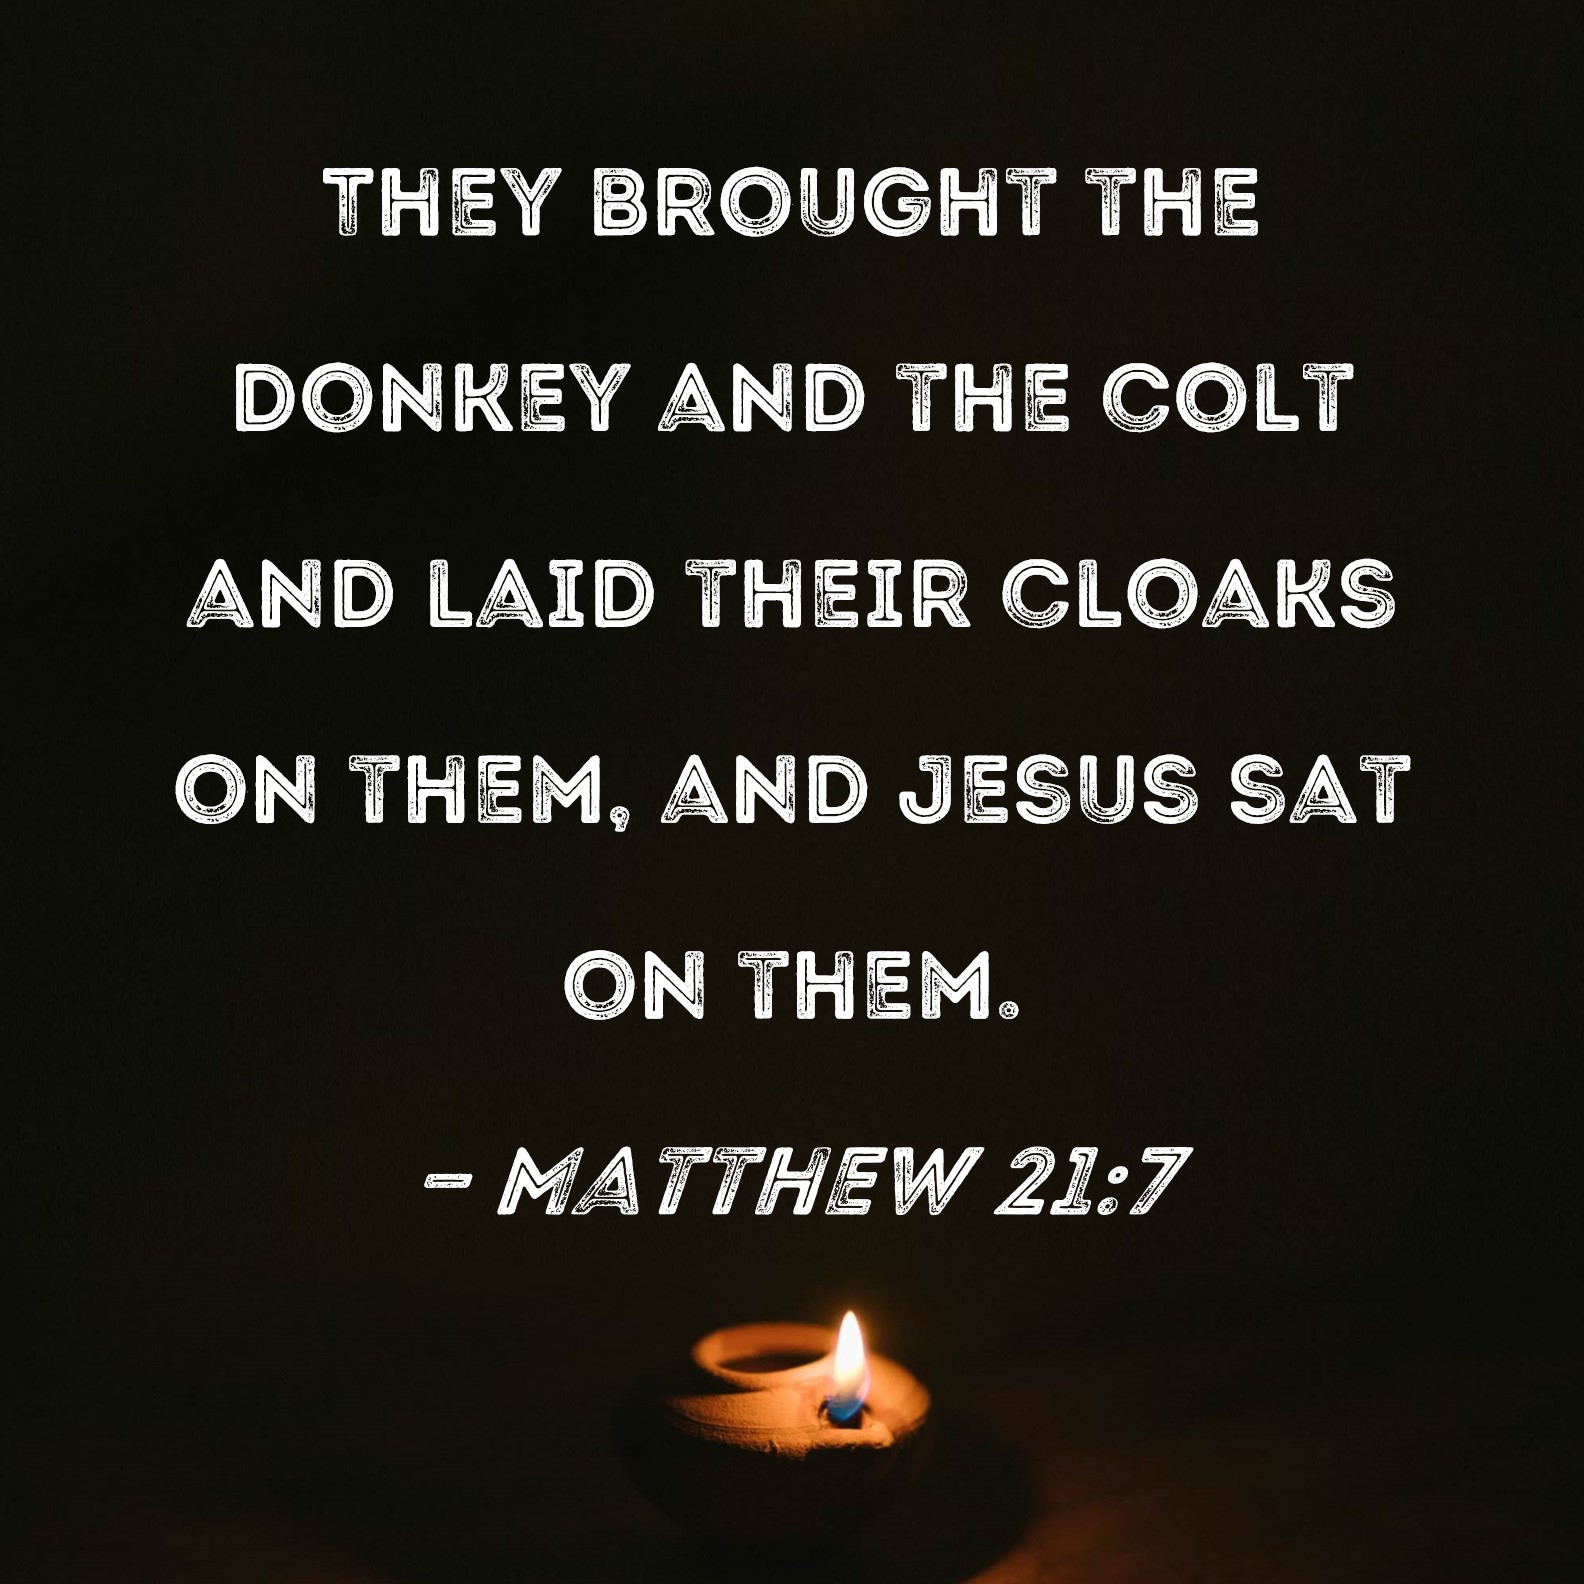 Matthew 21:7 They brought the donkey and the colt and laid their cloaks on them, and Jesus sat on them.